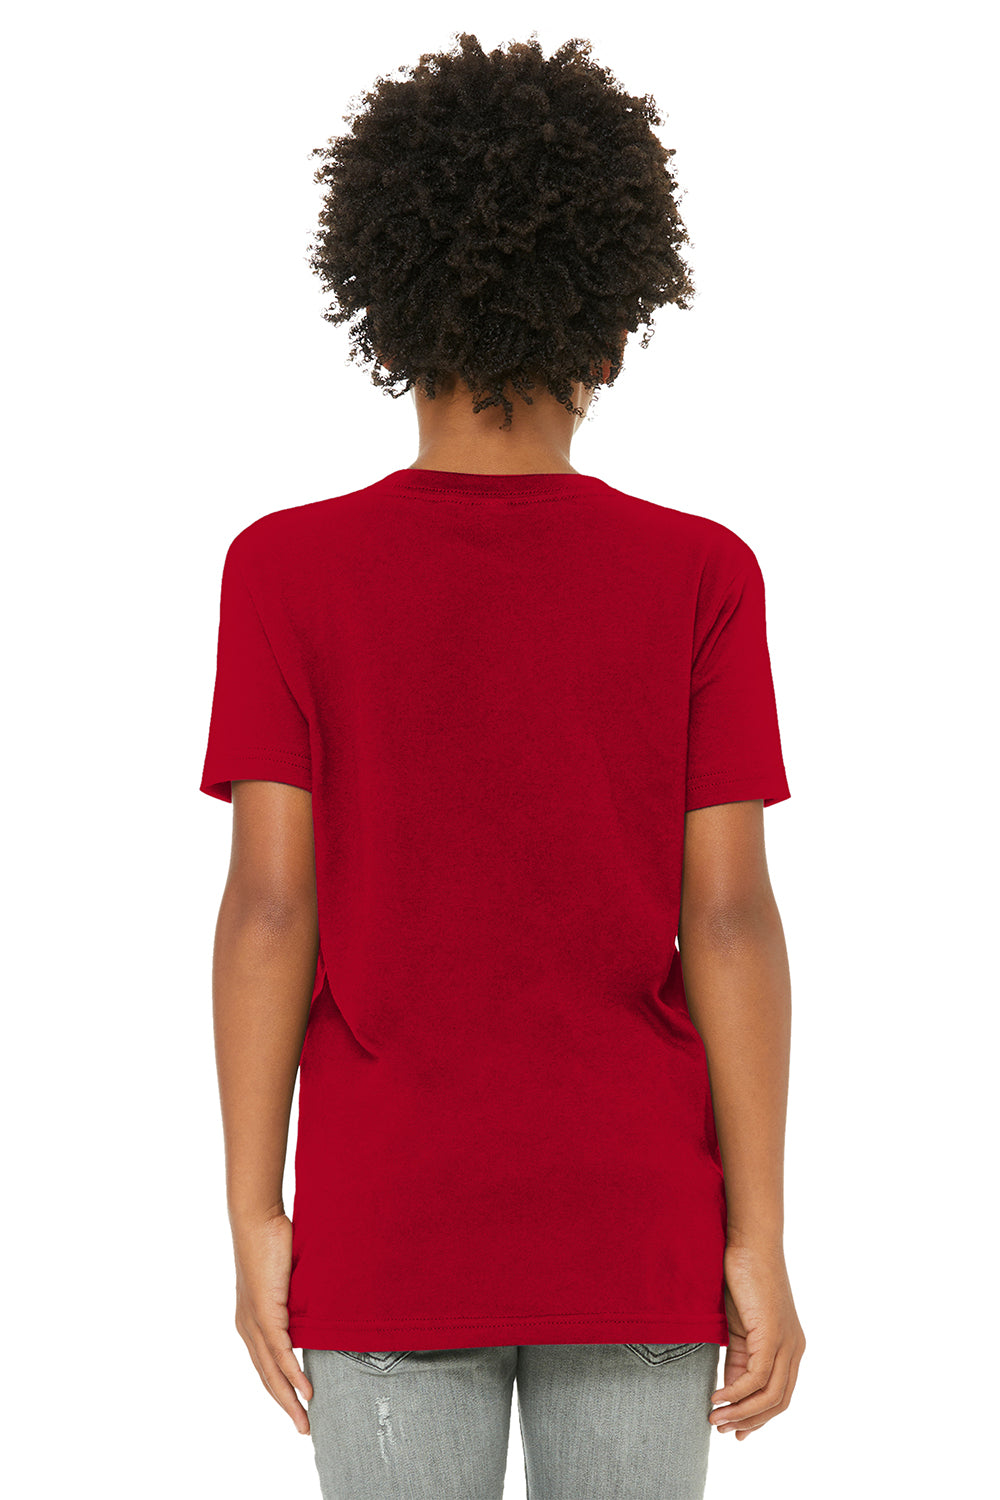 Bella + Canvas 3001Y Youth Jersey Short Sleeve Crewneck T-Shirt Red Model Back